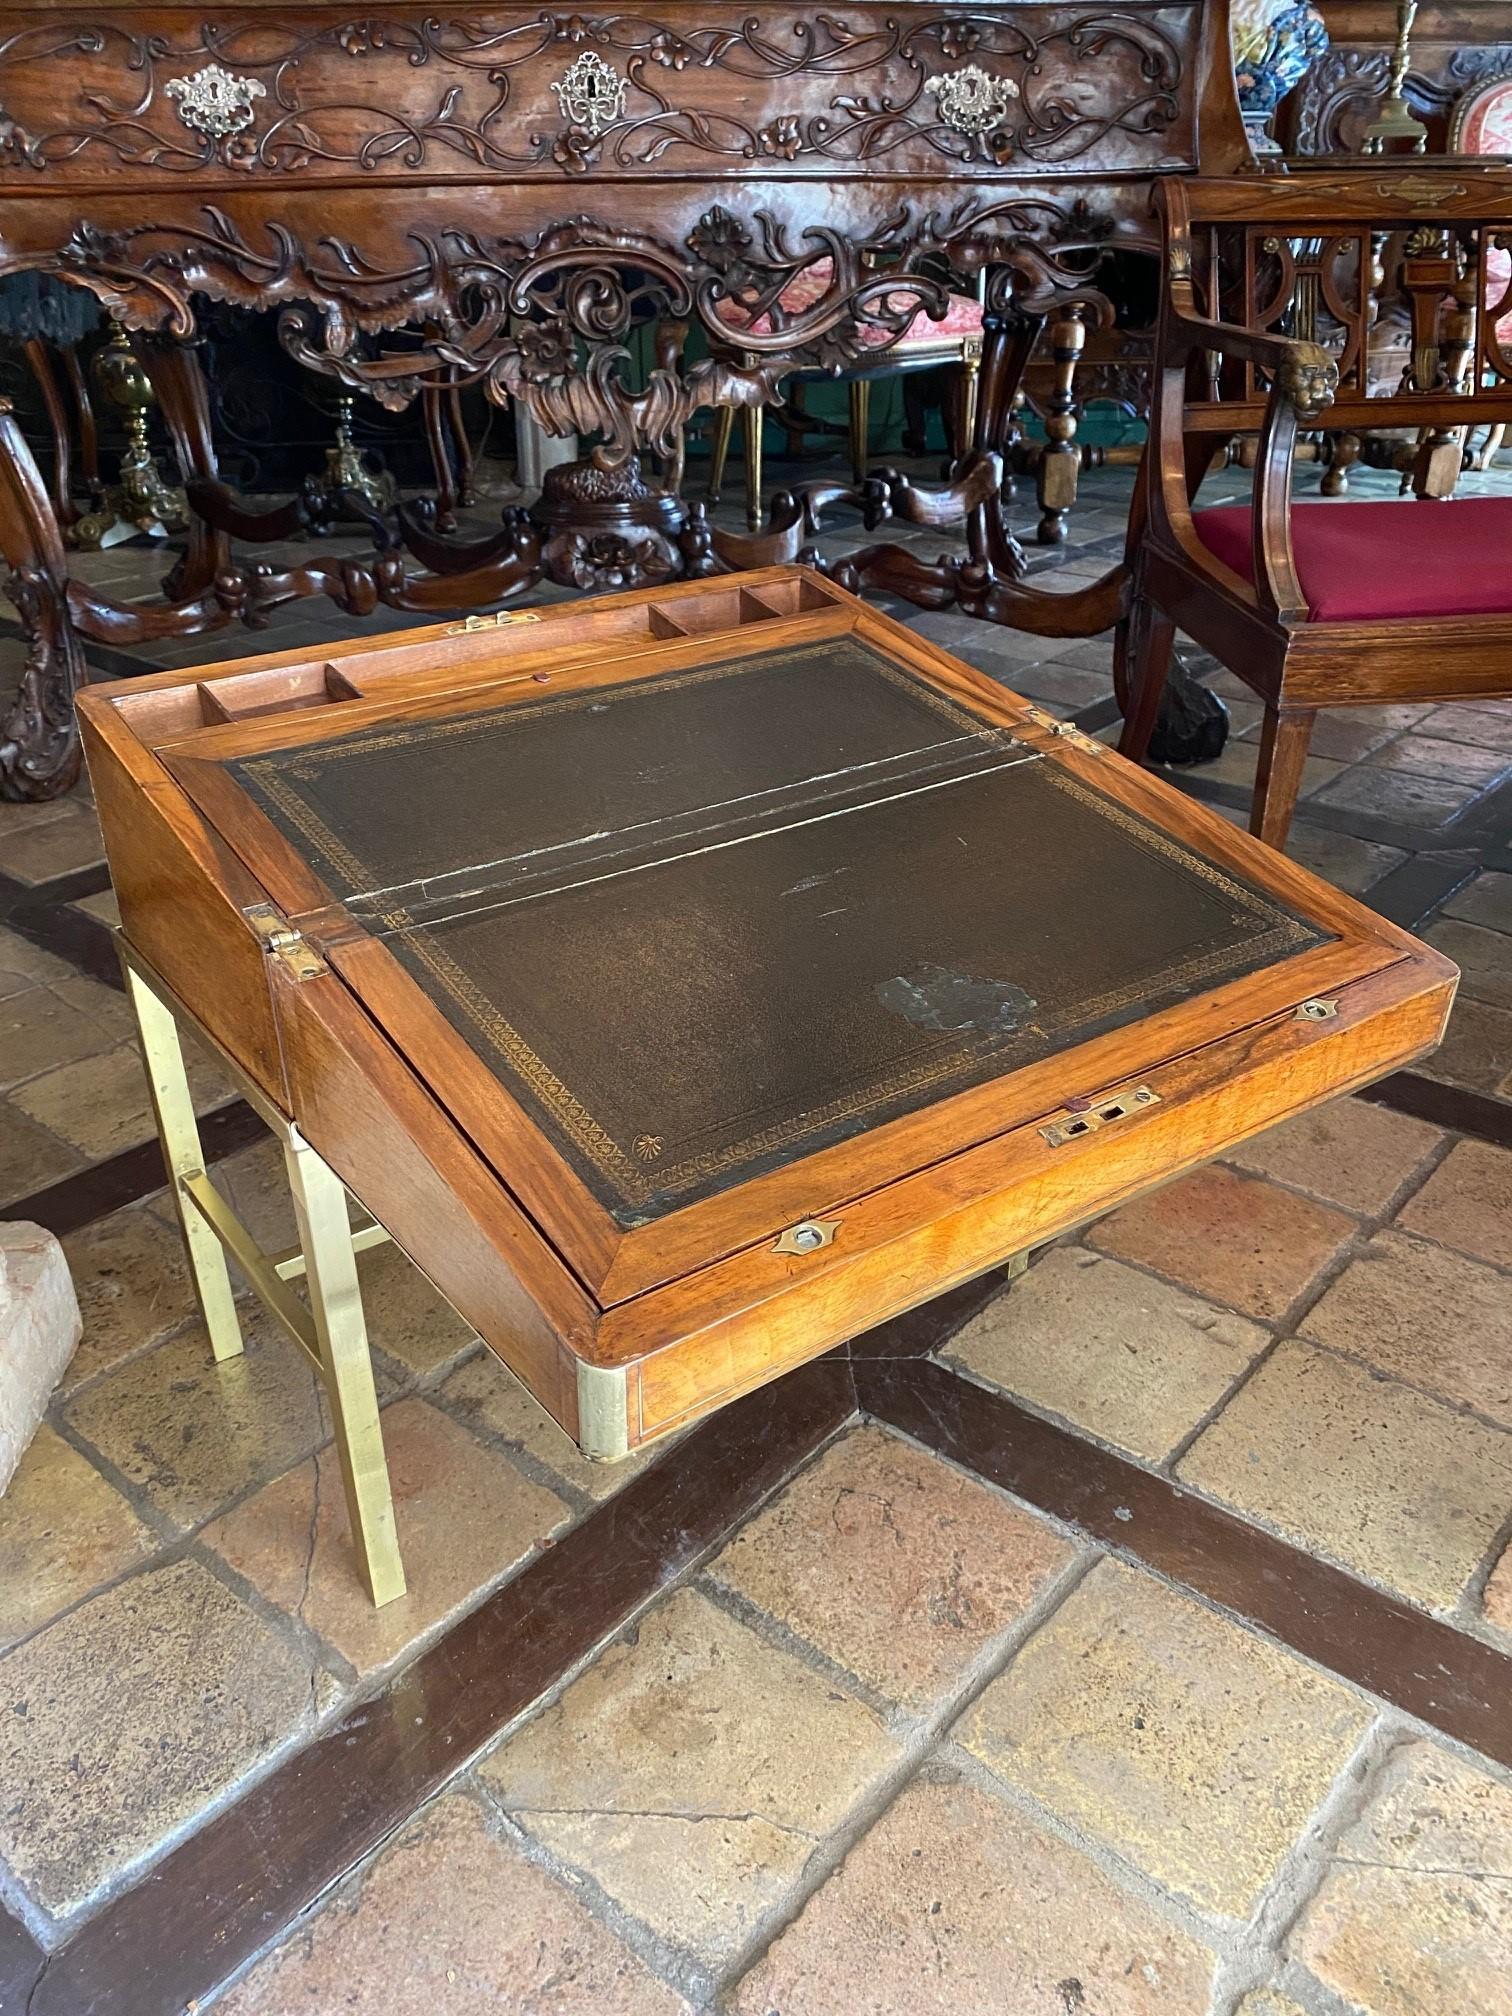 Exquisite English lap traveling desk portable. Countryside writing bureau in good condition considering the usage of the period in quality warm walnut wood. Rising on a later brass stand when not in use, fitted with Secret compartment and drawers